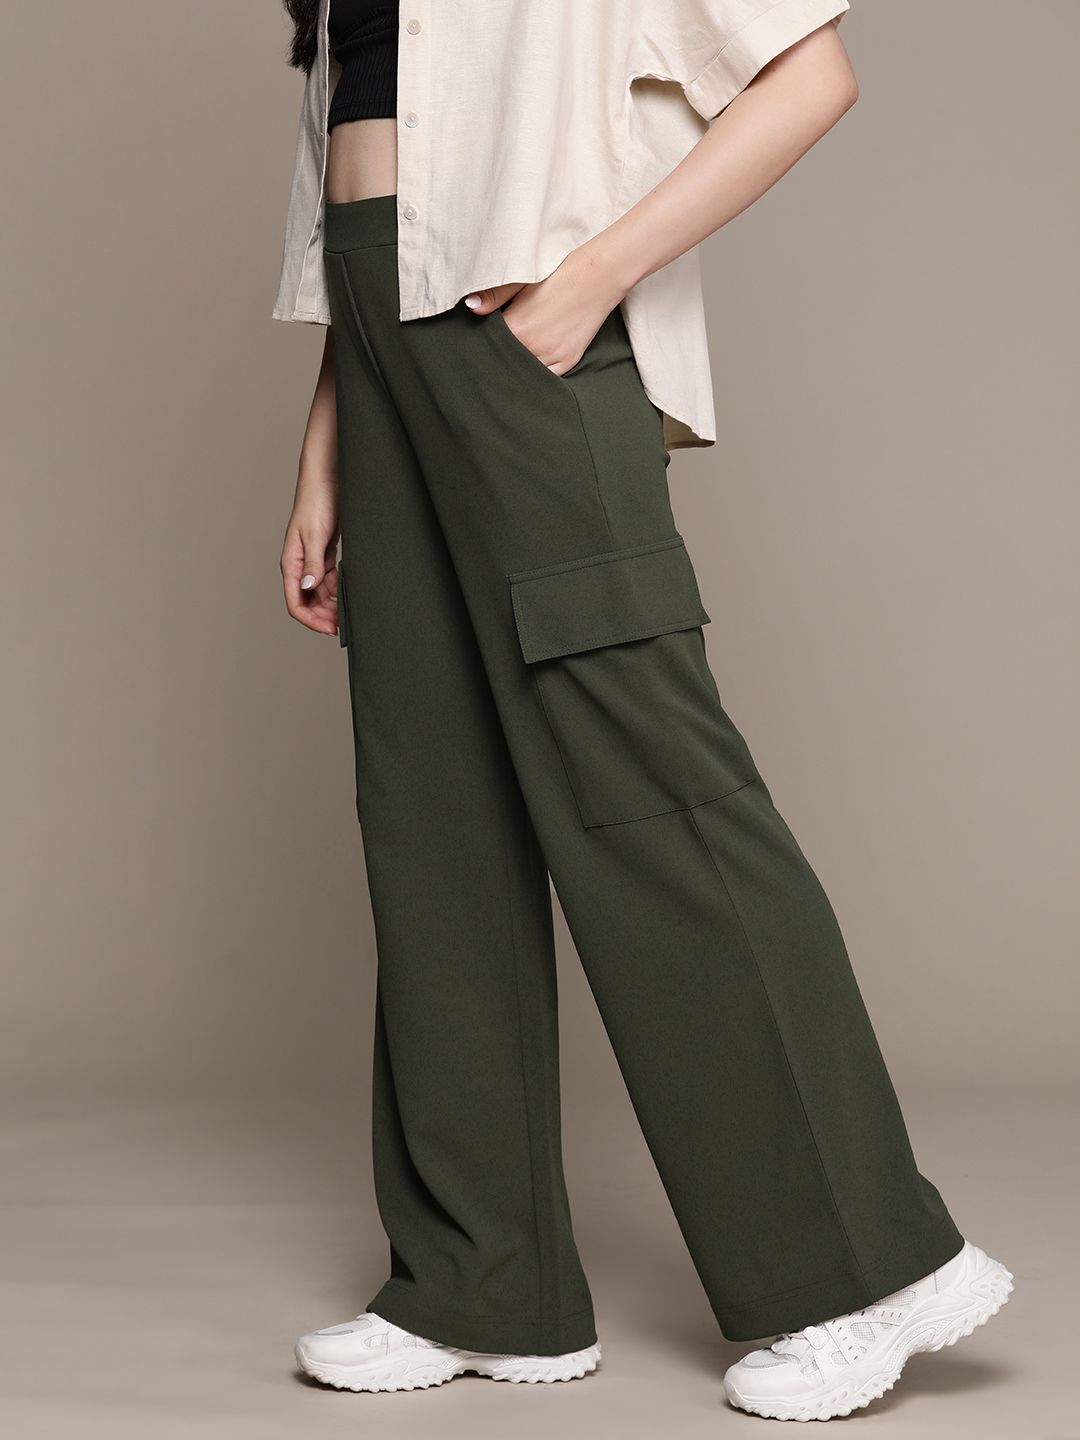 The Roadster Lifestyle Co. Women Cargos-Style Trousers Price in India